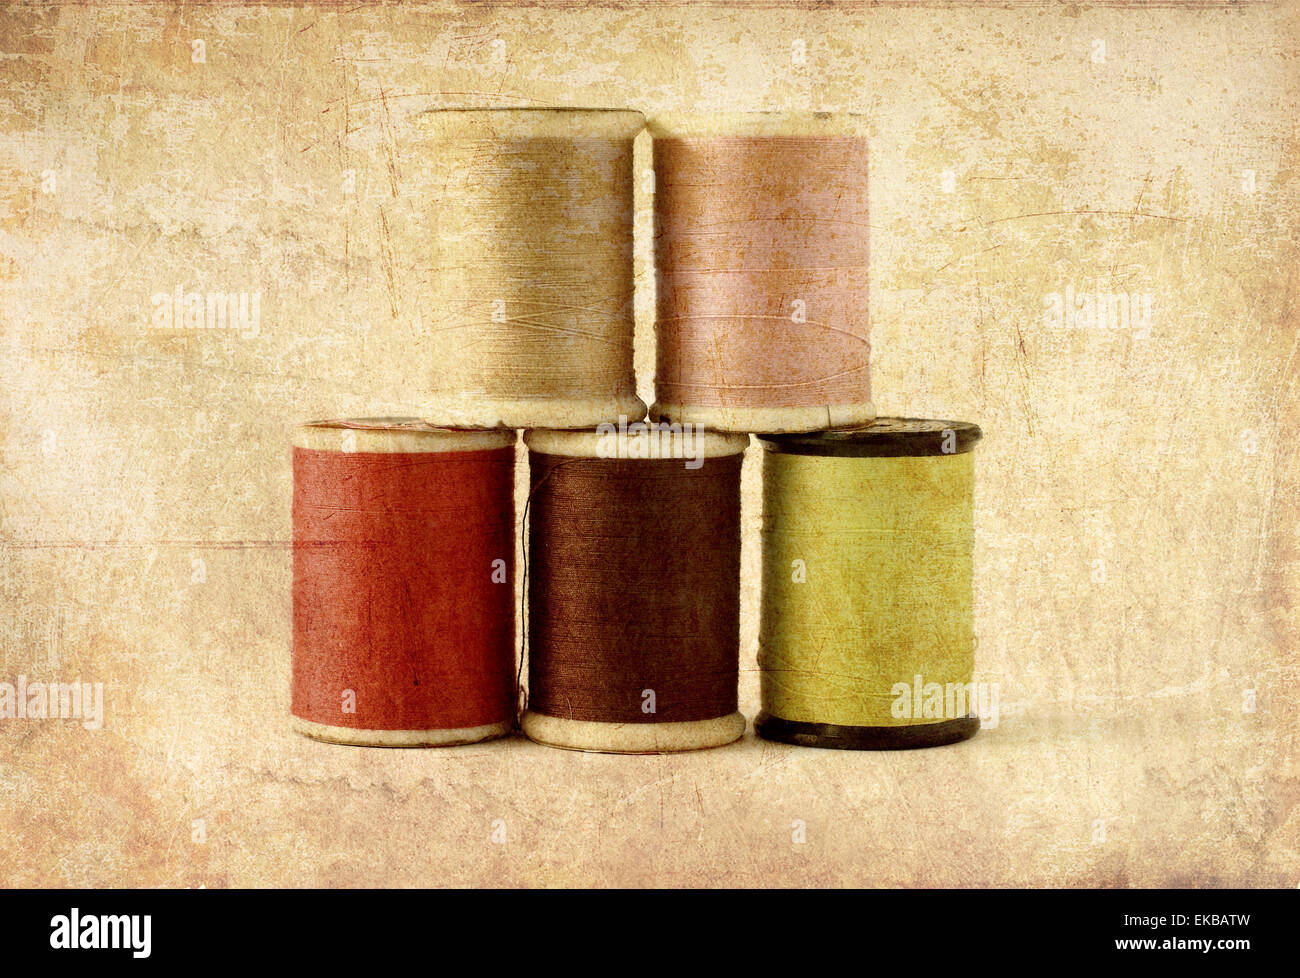 Different colors of thread spools, photo in old image style Stock Photo